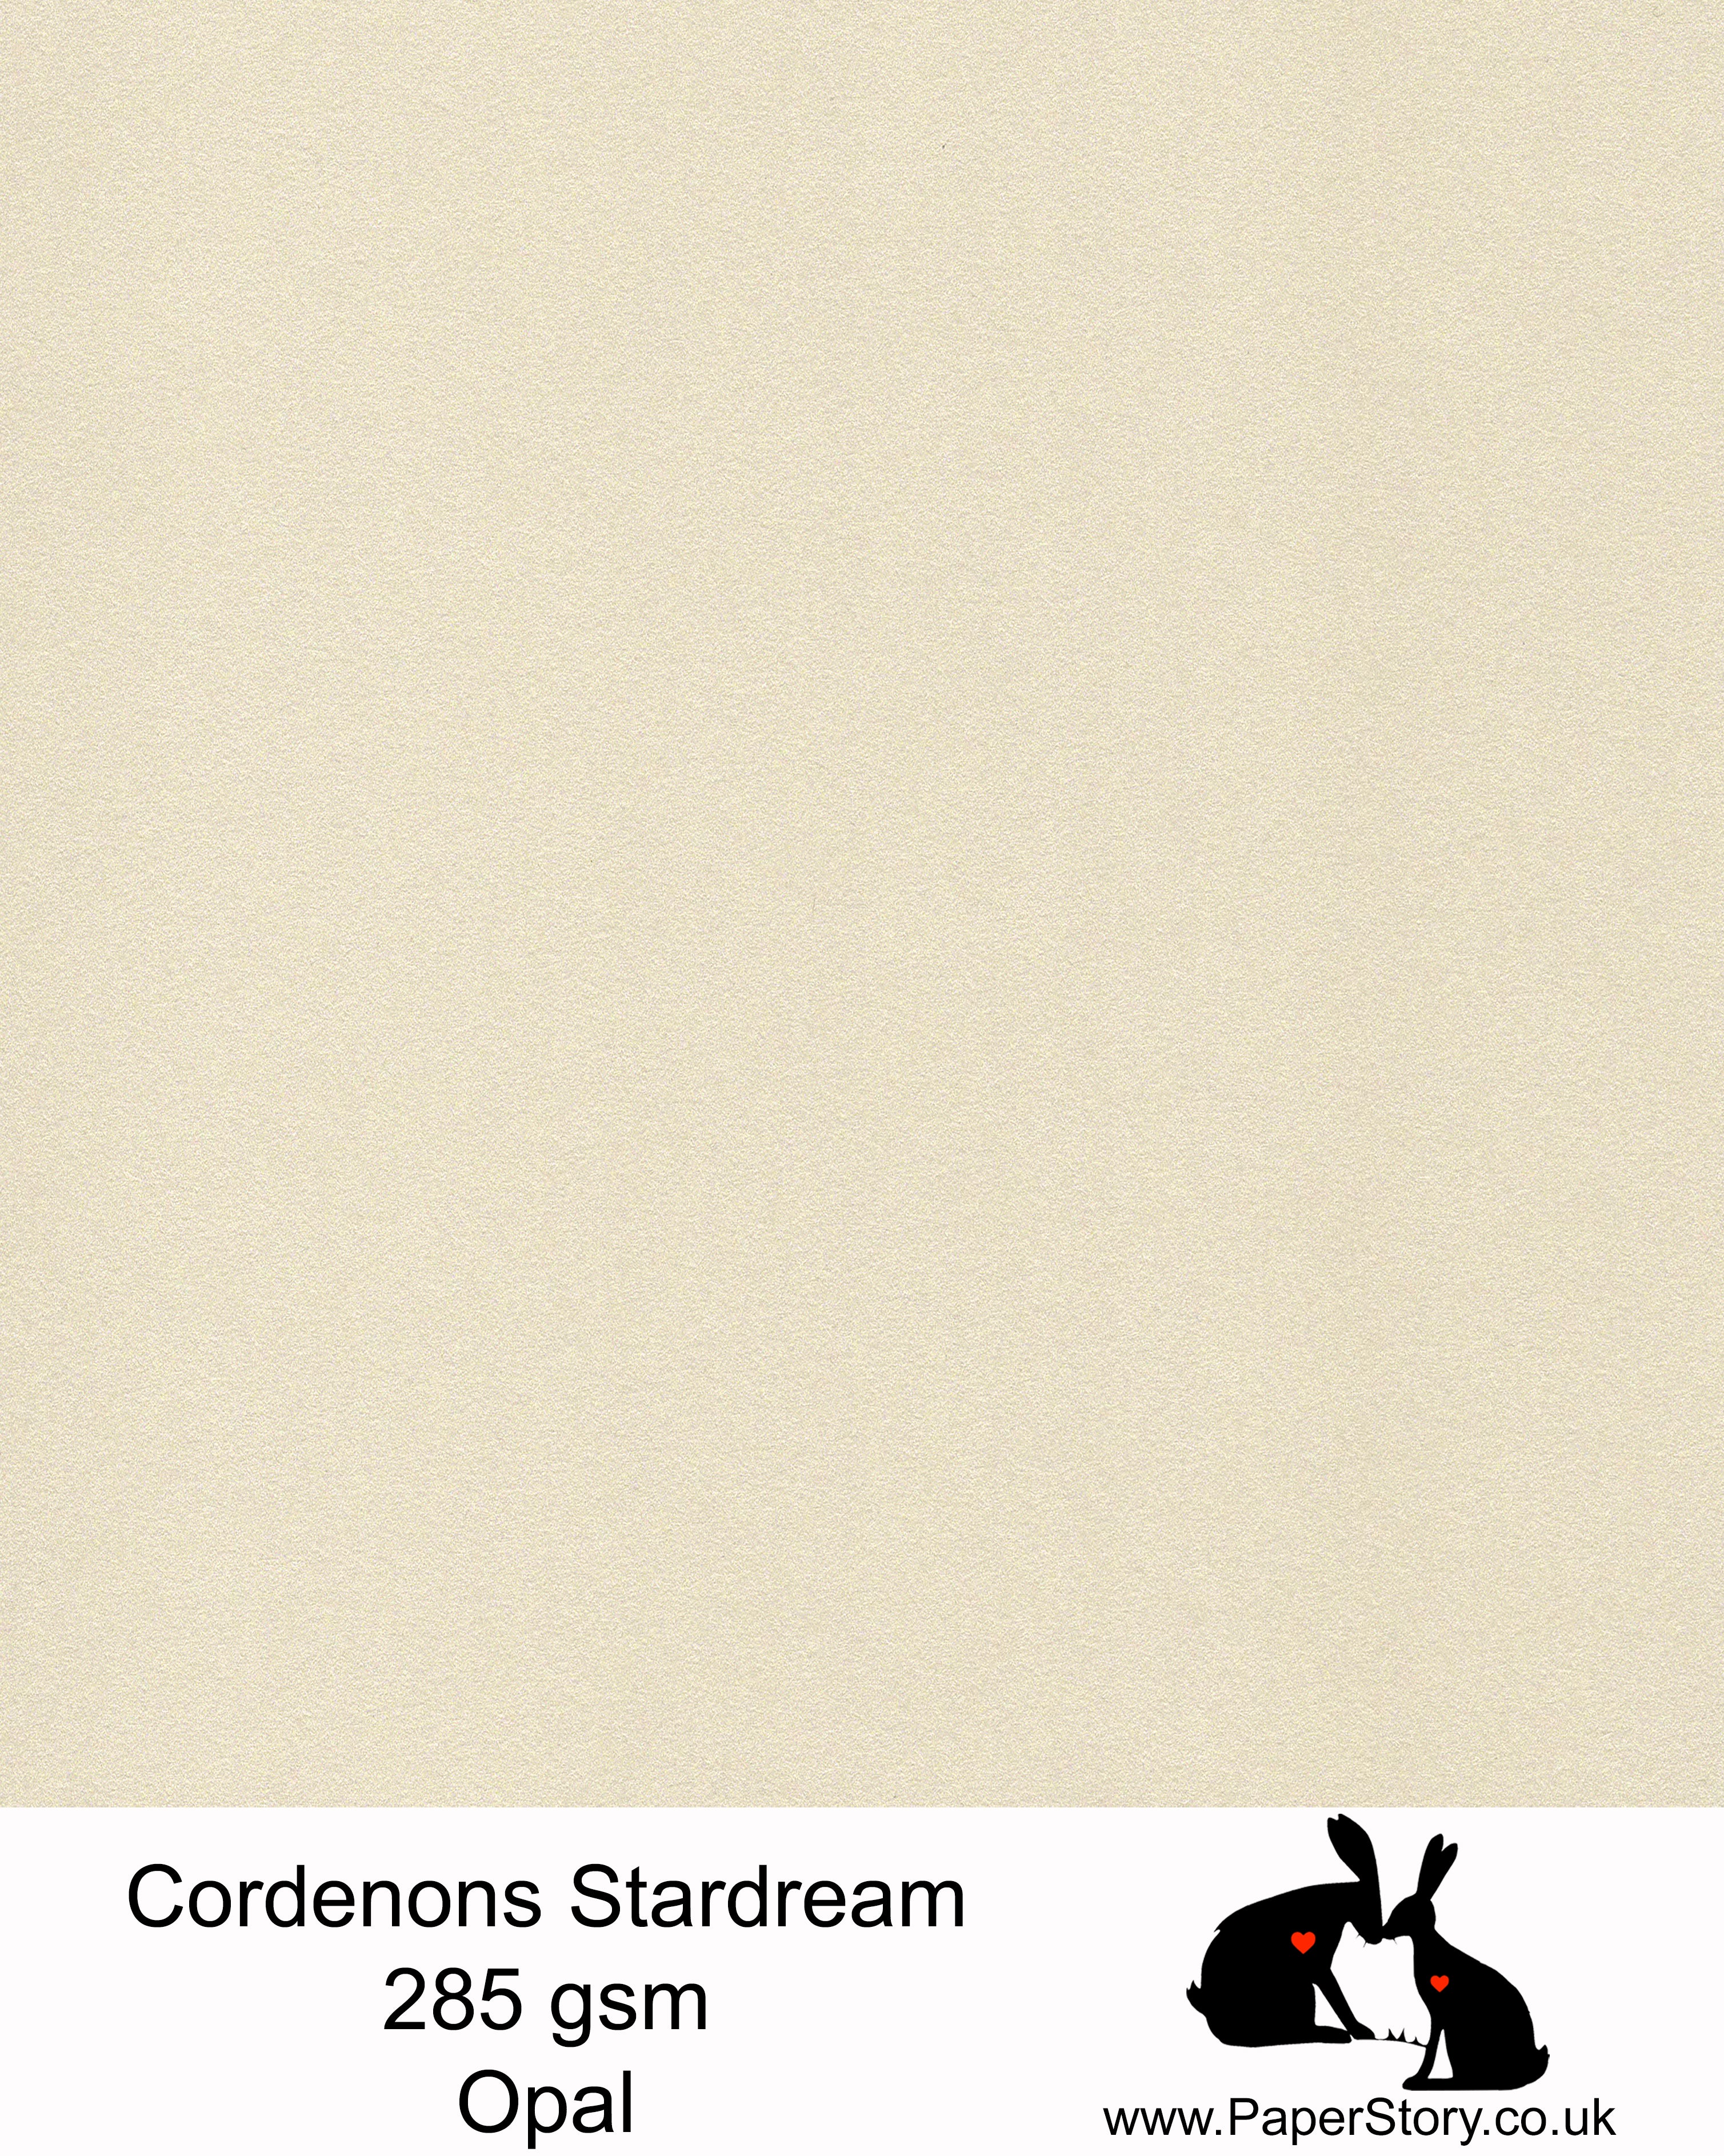 Stardream Opal, warm ivory cream is a luxury premium branded Italian pearlescent card from Gruppo Cordenons, made in Italy. The card has a double sided quality pearlescent finish with a colour core. Perfect for card making, wedding invitations and stationery.FSC certified, acid free, archival and PH neutral